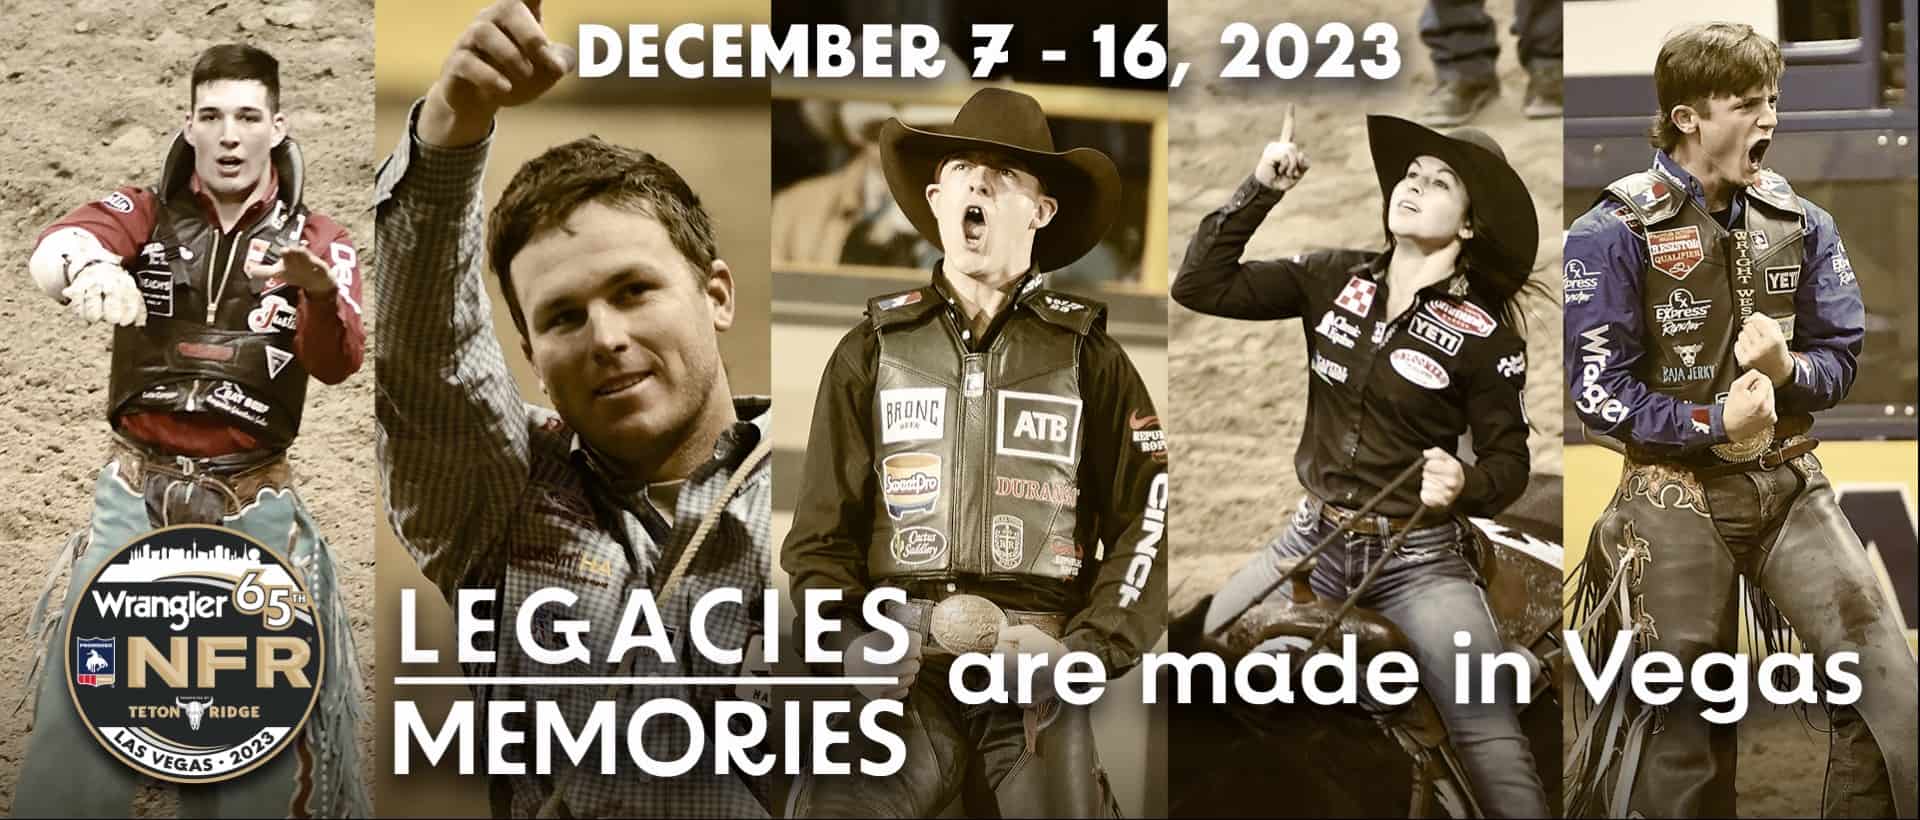 How to Watch the NFR 2023 Live and Streaming